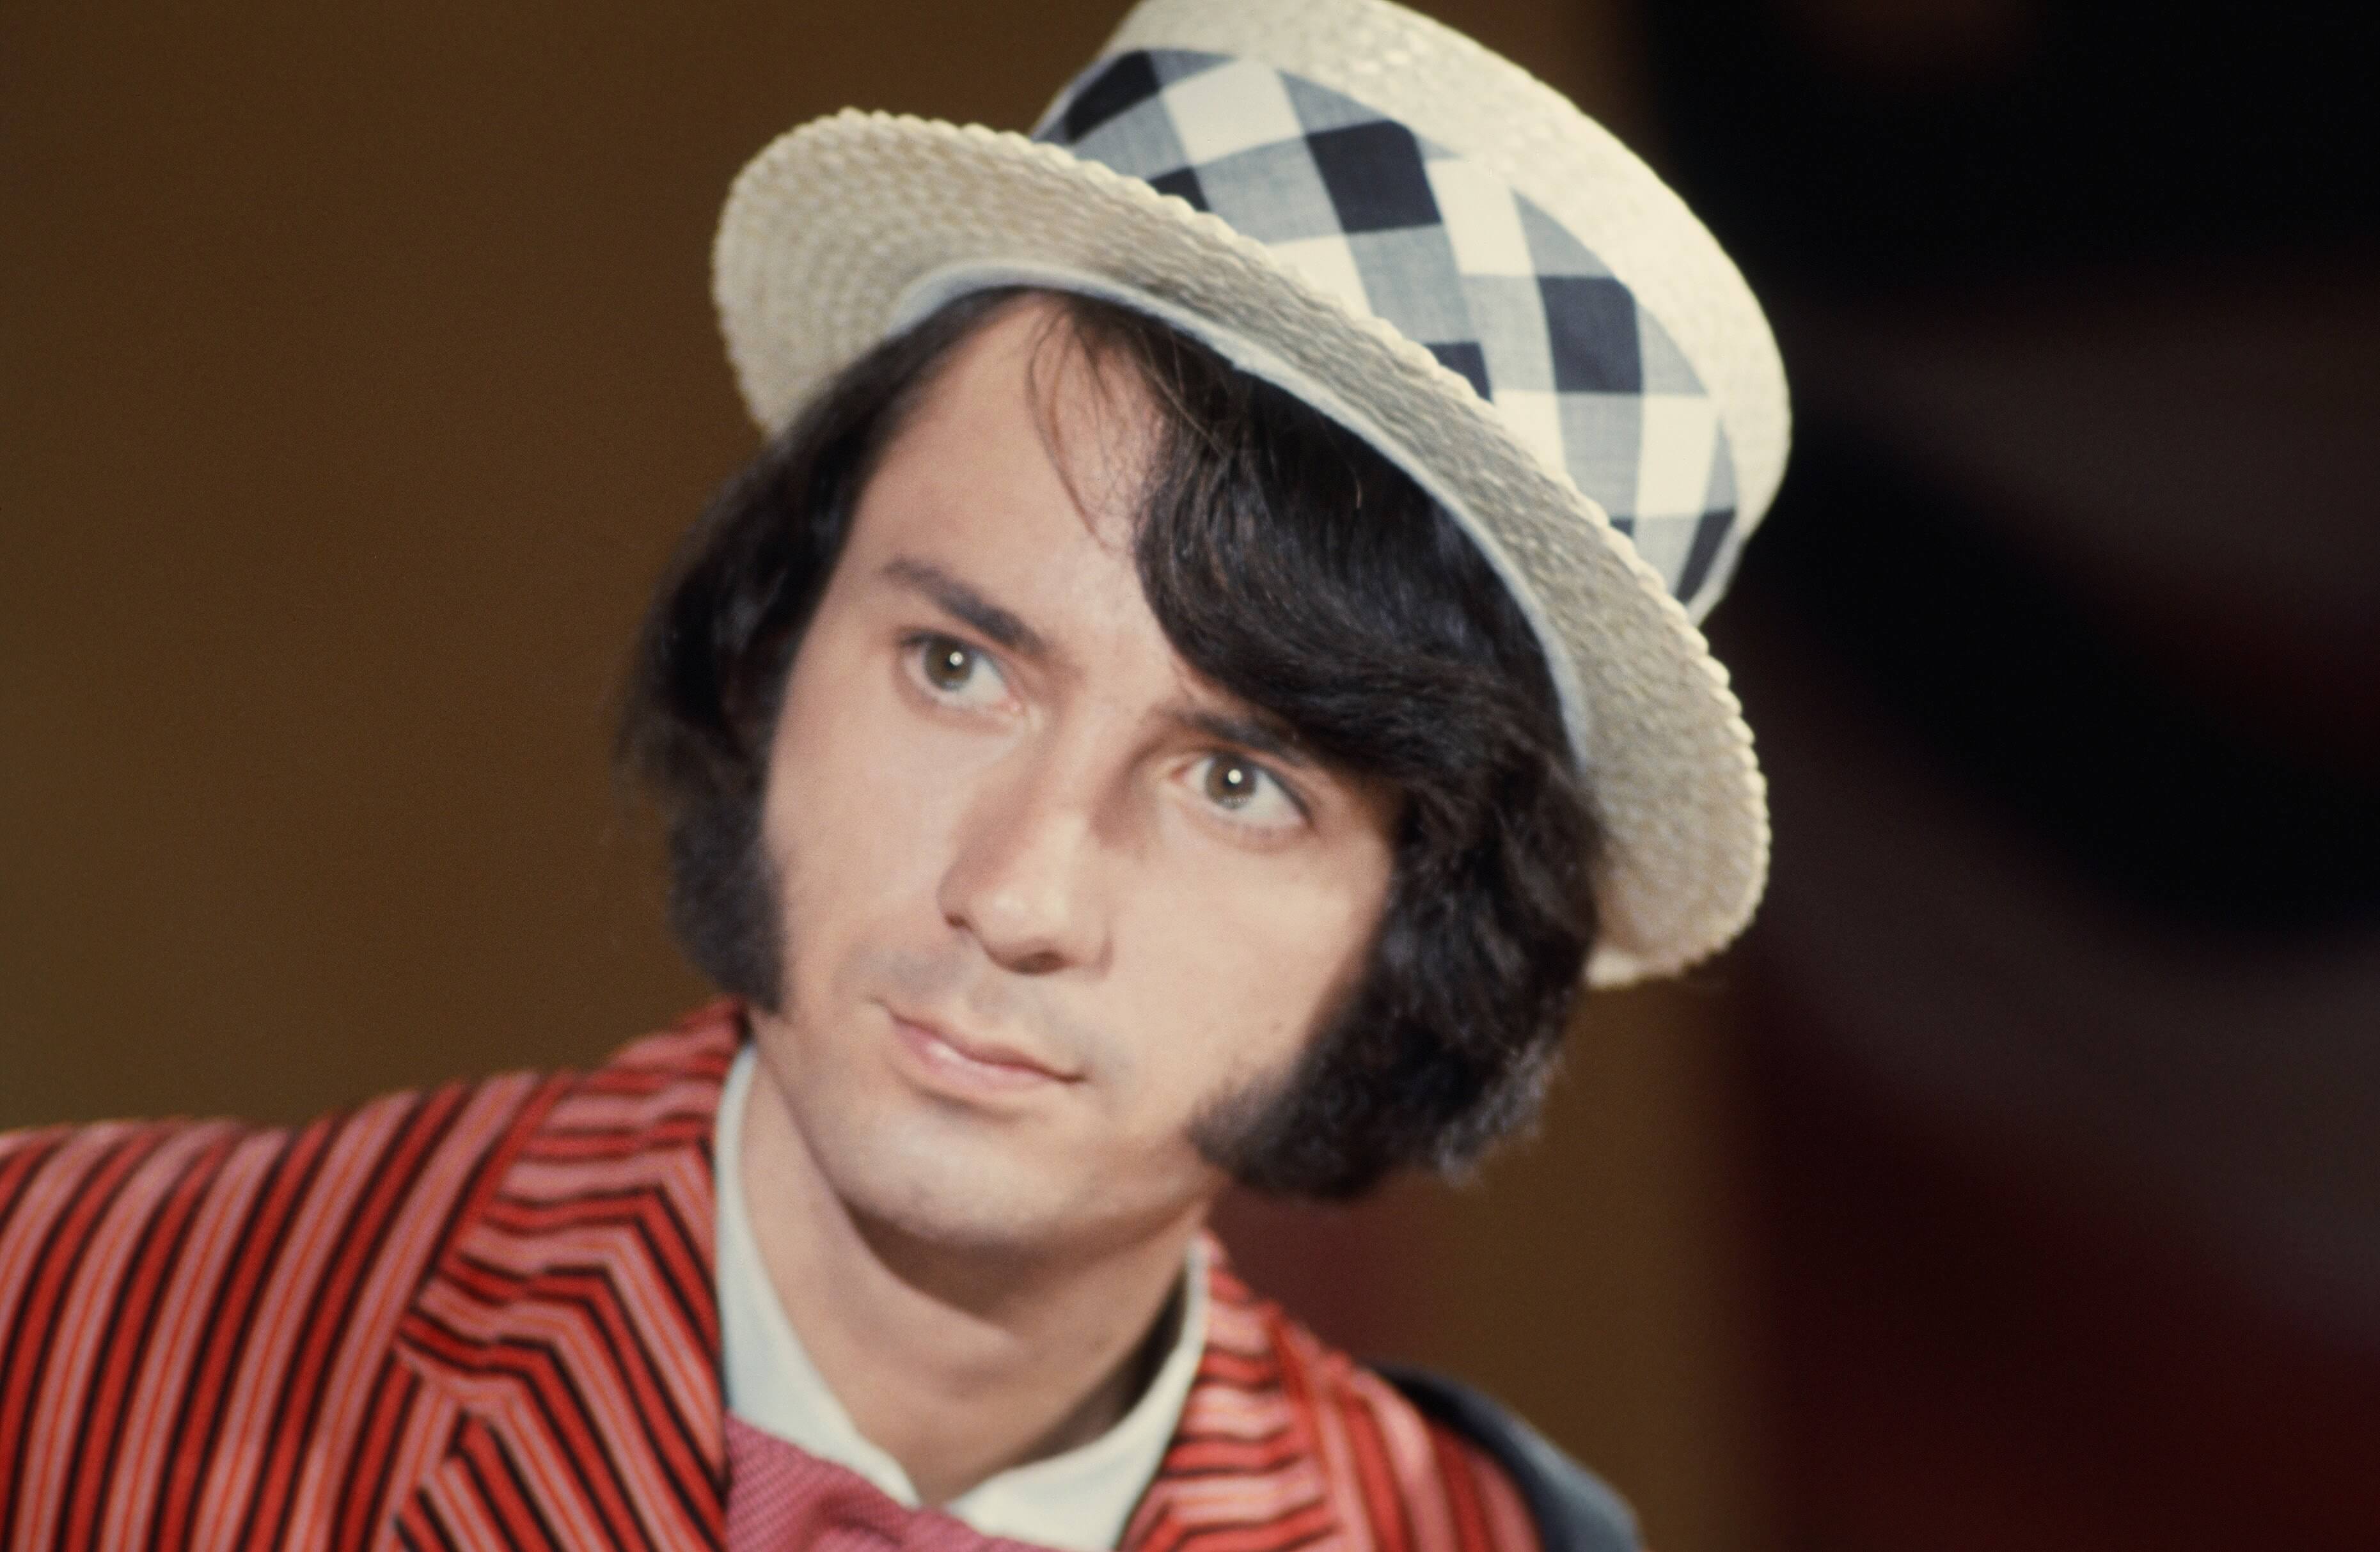 The Monkees member Mike Nesmith in a hat